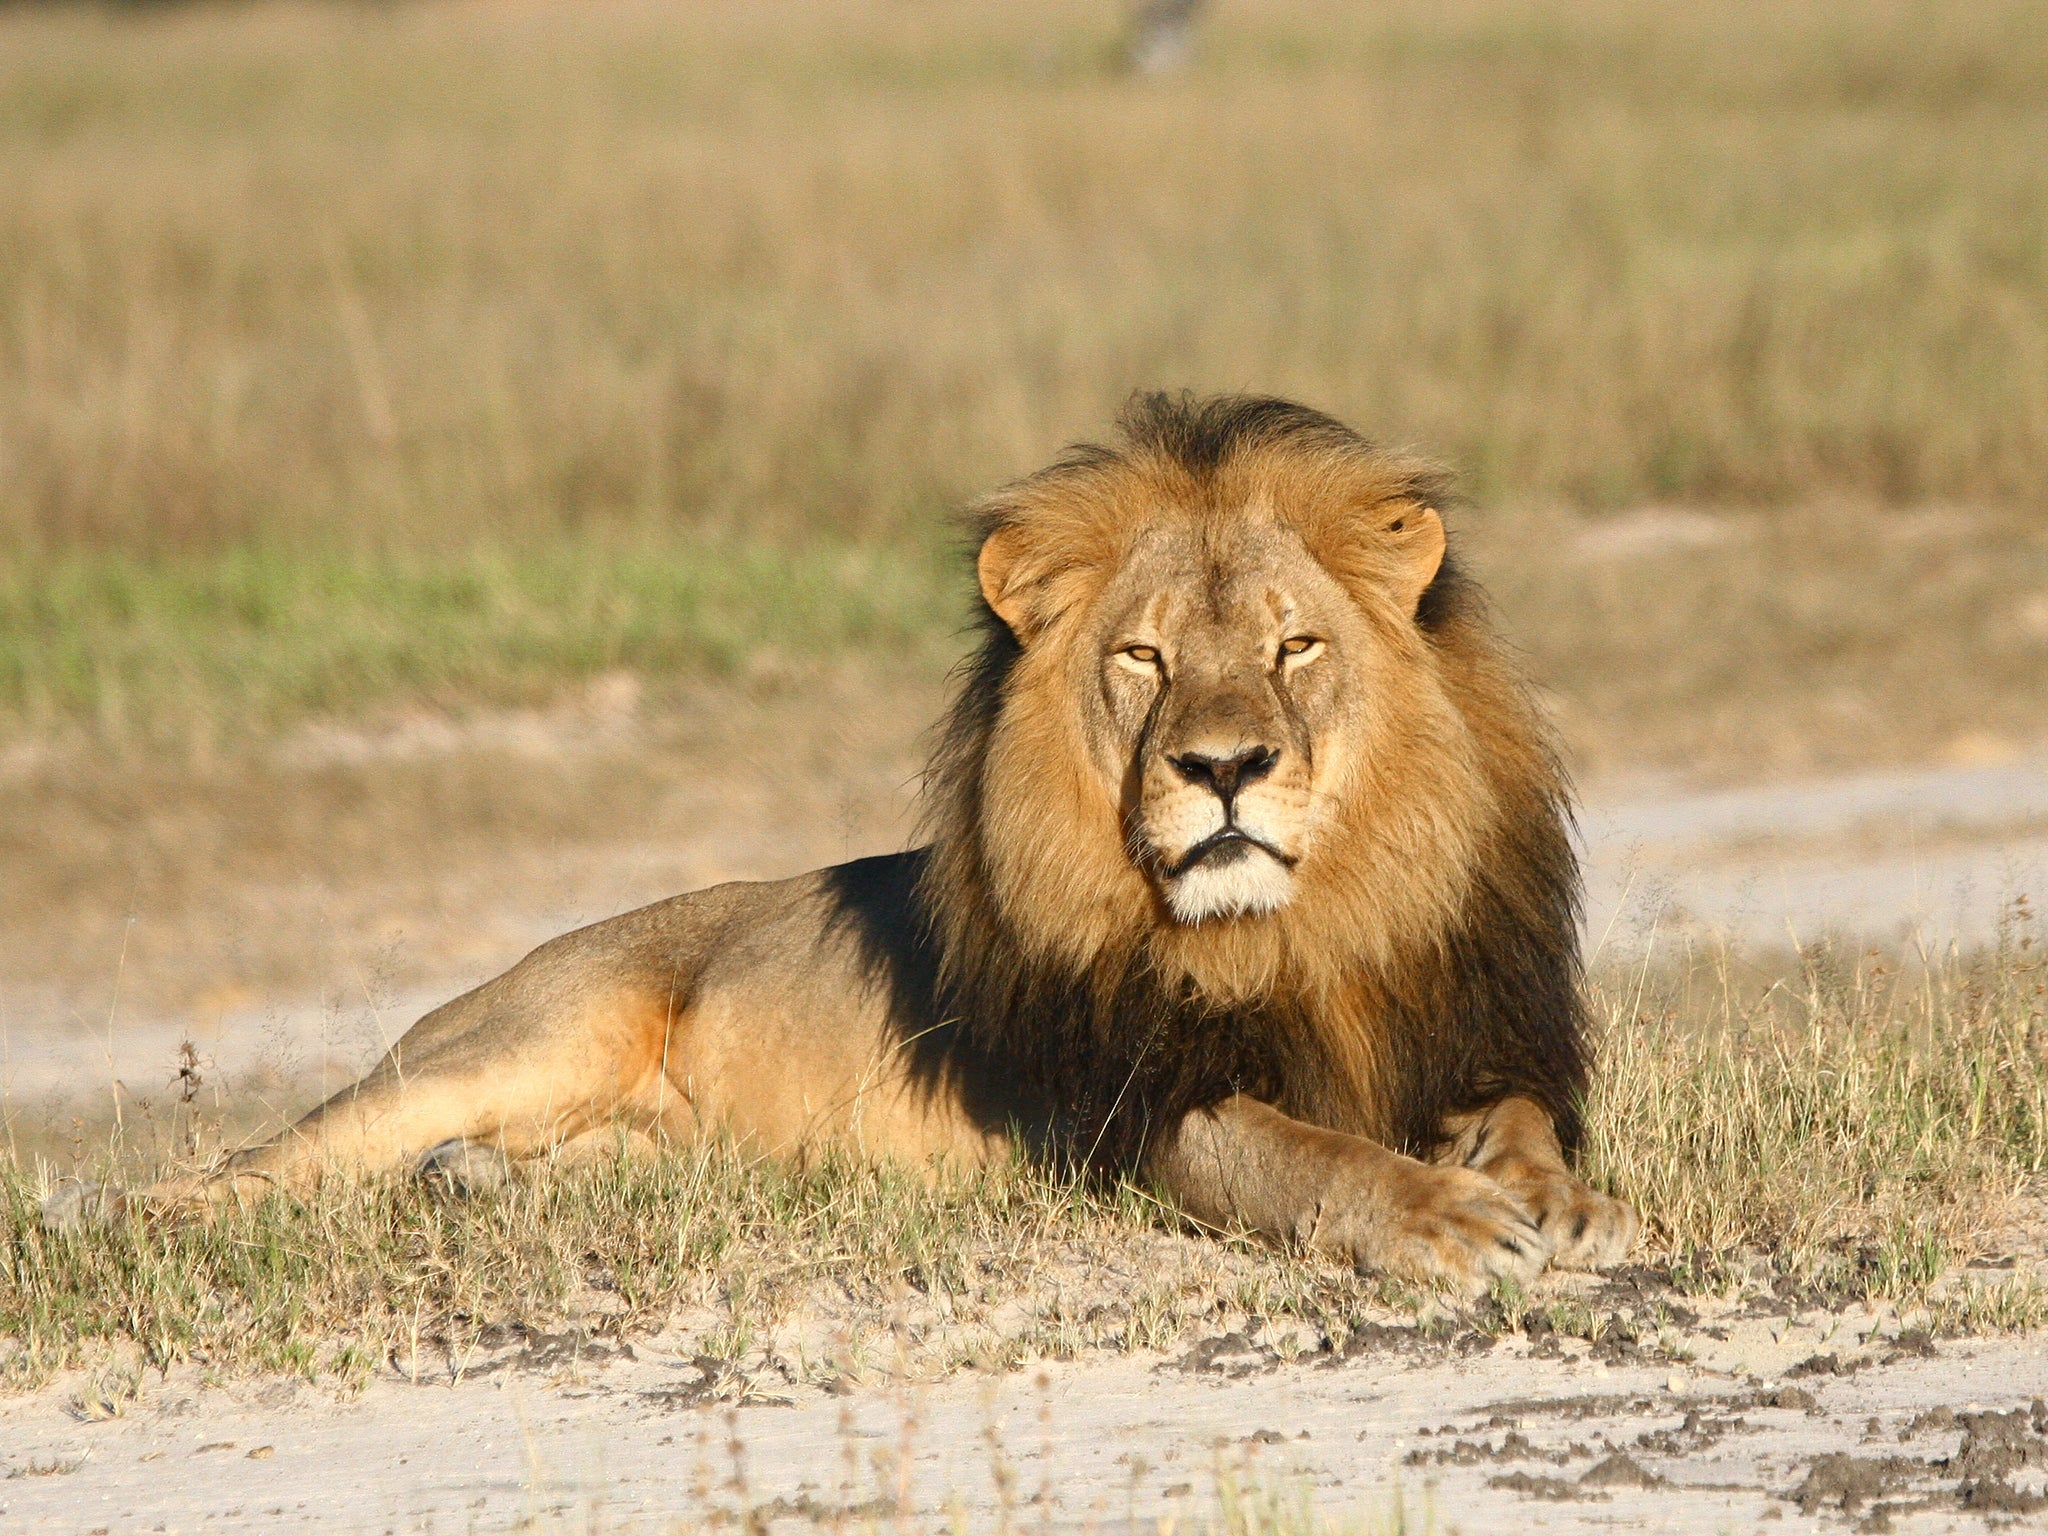 Cecil the lion was killed on 1 July 2015, sparking widespread international outrage